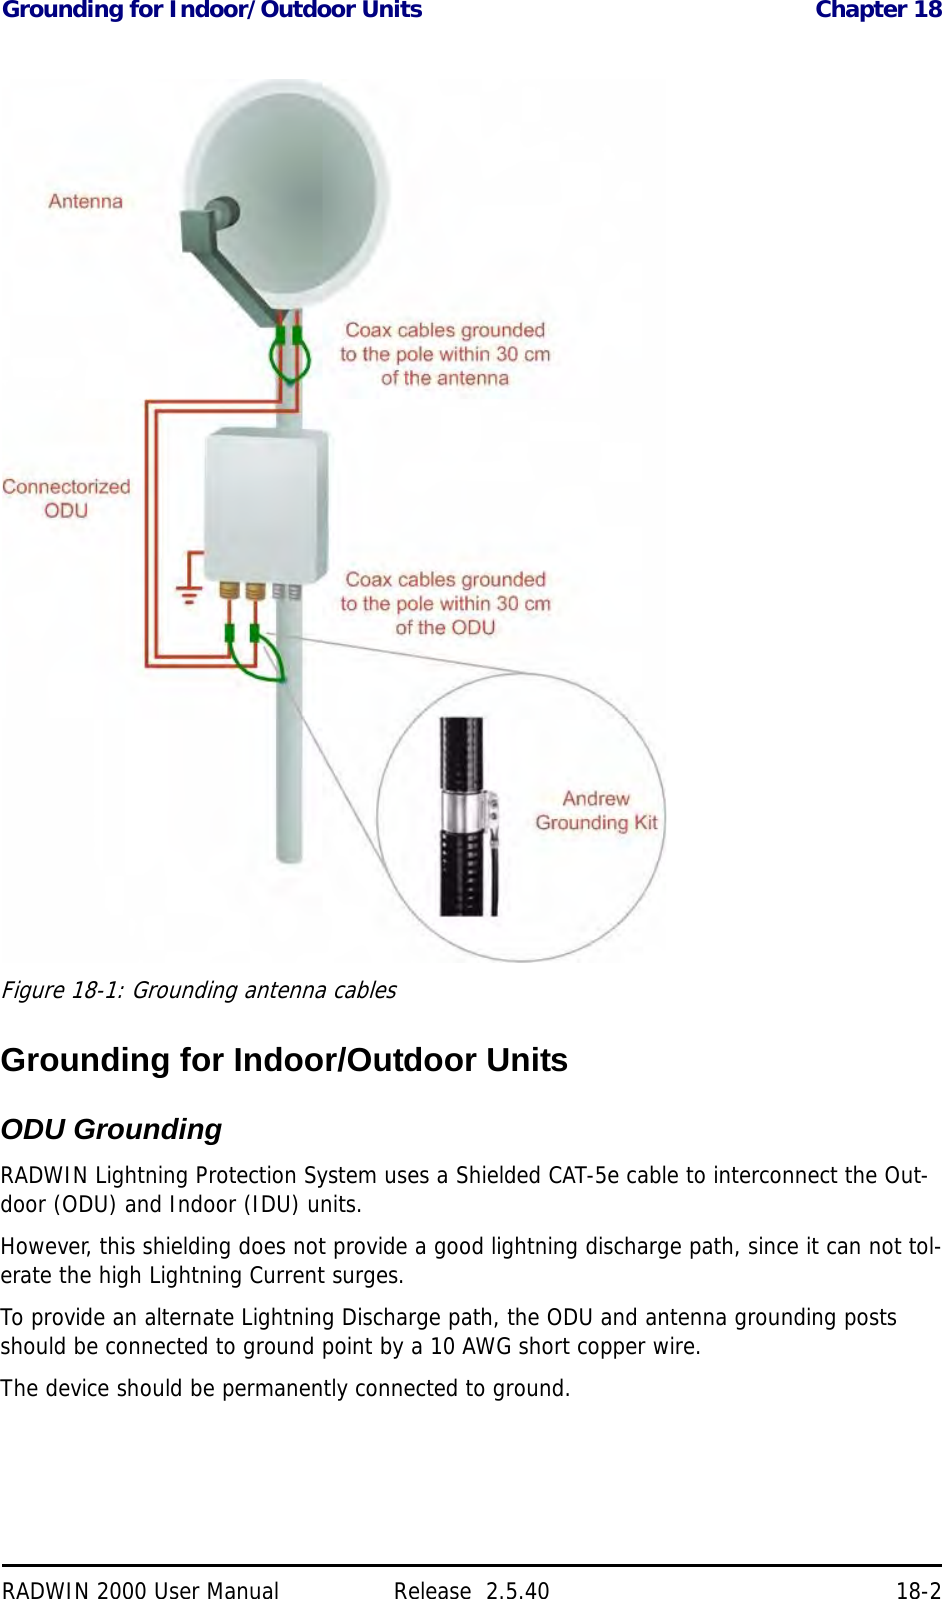 Grounding for Indoor/Outdoor Units Chapter 18RADWIN 2000 User Manual Release  2.5.40 18-2Figure 18-1: Grounding antenna cablesGrounding for Indoor/Outdoor UnitsODU GroundingRADWIN Lightning Protection System uses a Shielded CAT-5e cable to interconnect the Out-door (ODU) and Indoor (IDU) units. However, this shielding does not provide a good lightning discharge path, since it can not tol-erate the high Lightning Current surges.To provide an alternate Lightning Discharge path, the ODU and antenna grounding posts should be connected to ground point by a 10 AWG short copper wire.The device should be permanently connected to ground.